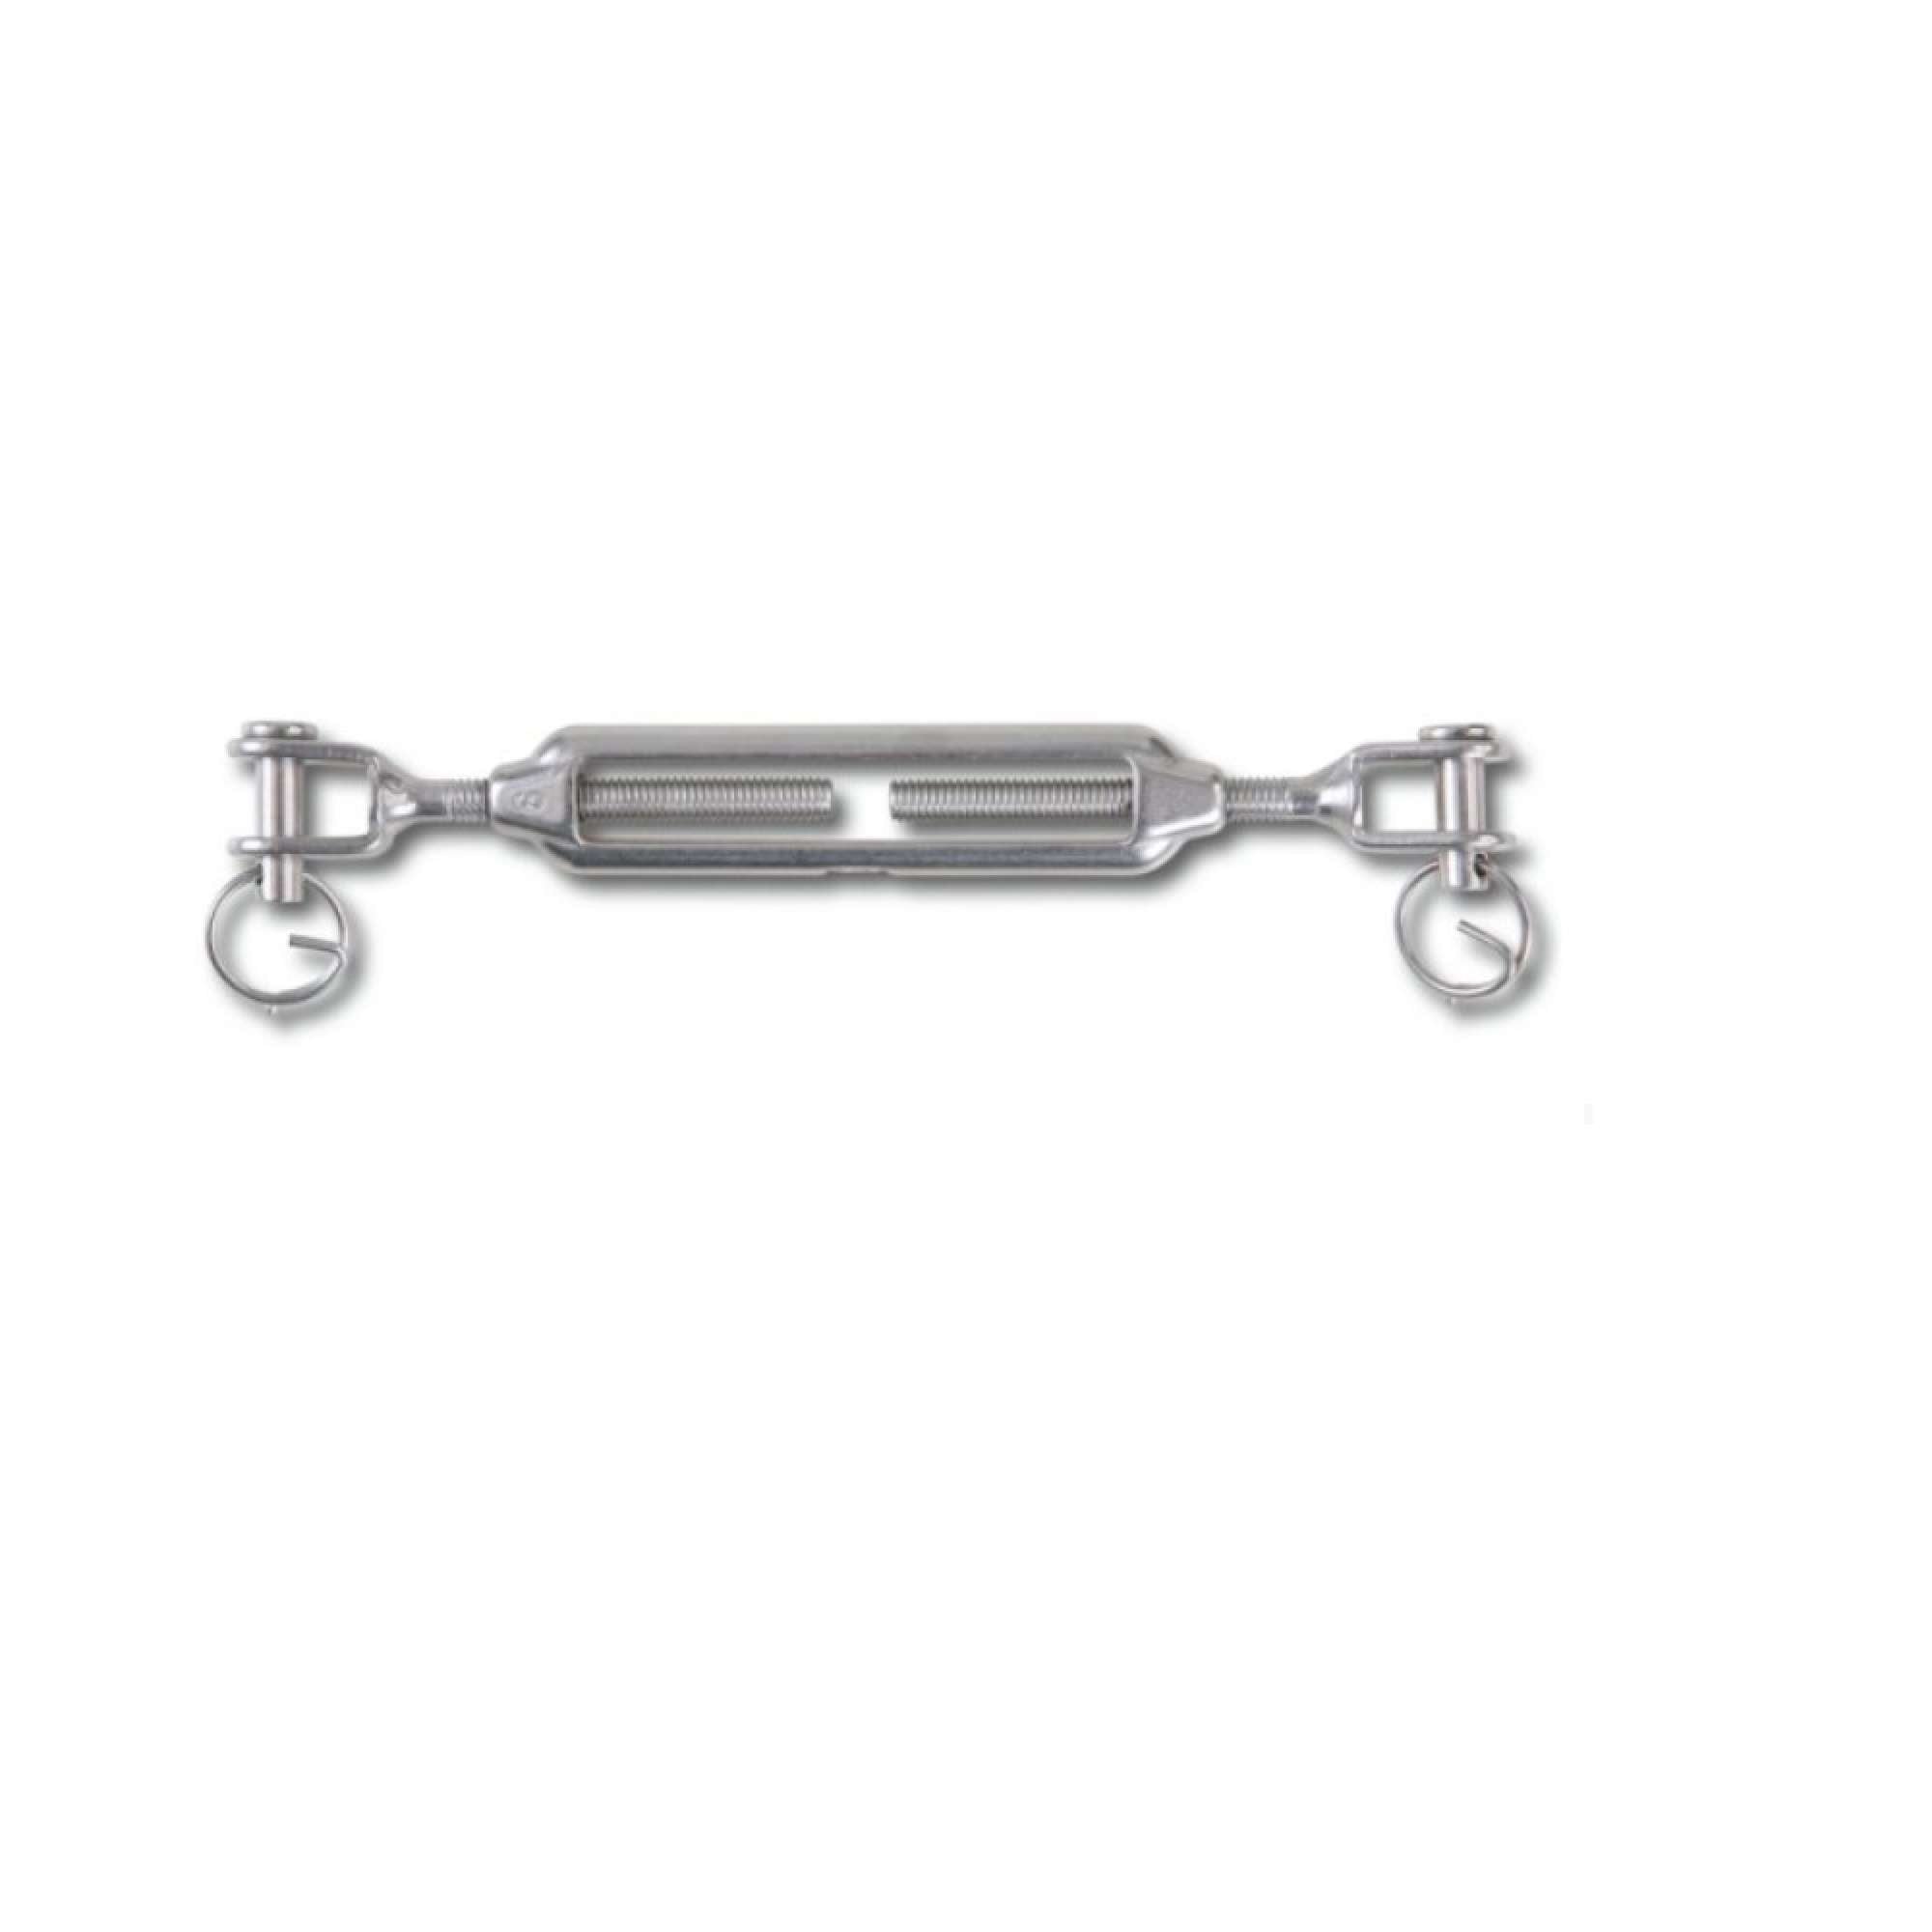 AISI 316 stainless steel two-fork turnbuckle - Beta 82090212